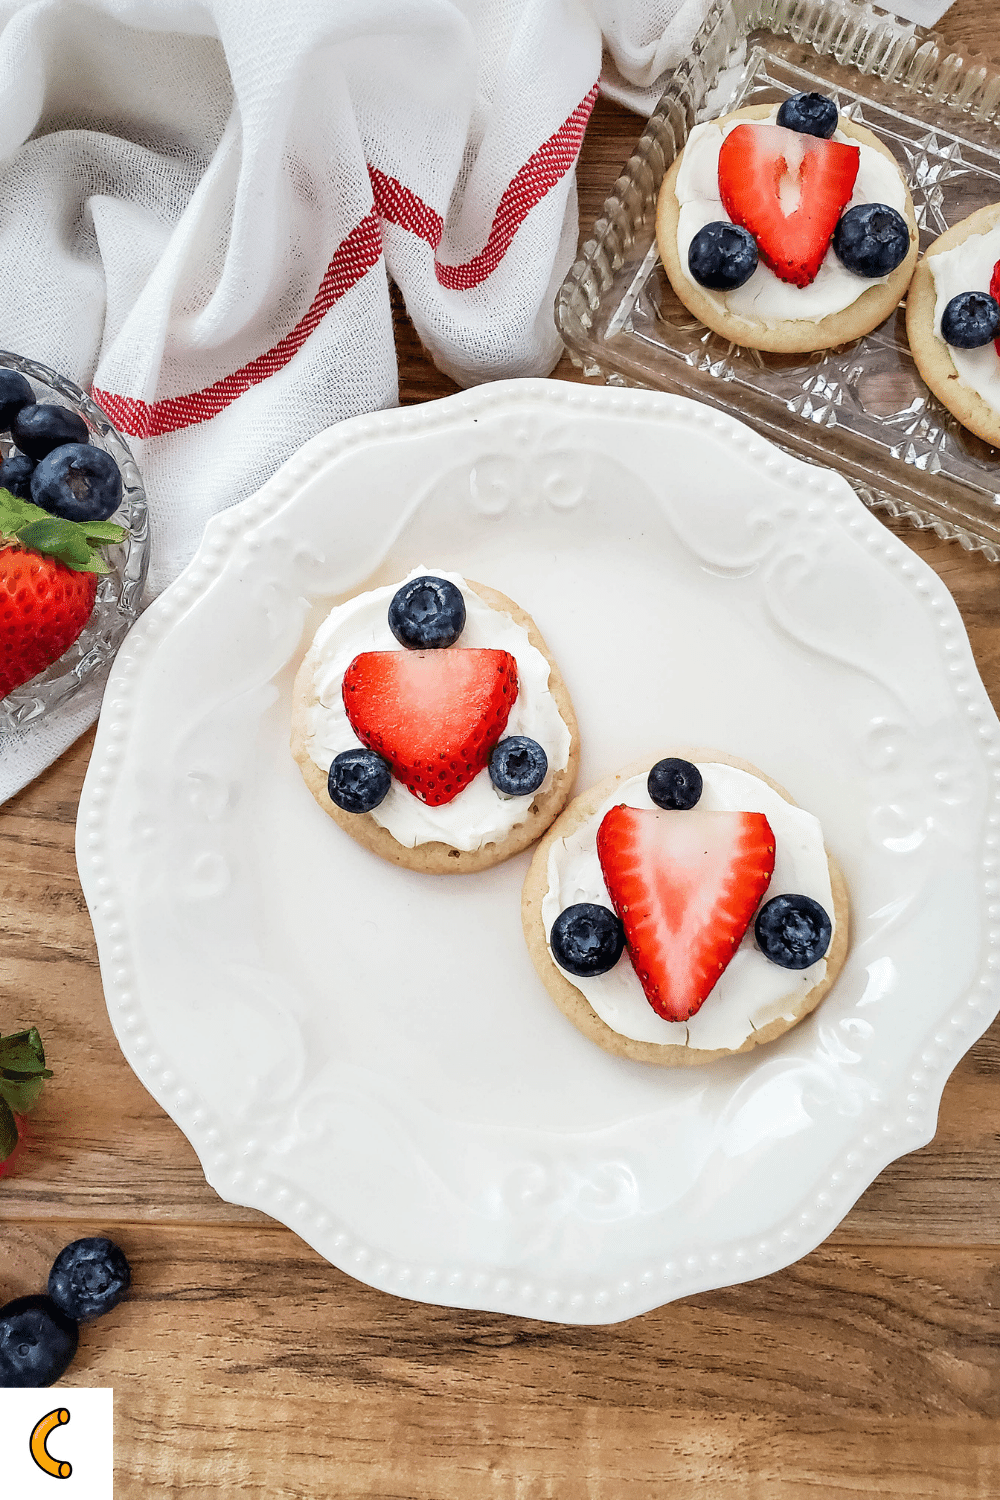 Cookies topped with cream cheese frosting, blueberries, and strawberries for a delicious 4th of July treat the whole family will enjoy!